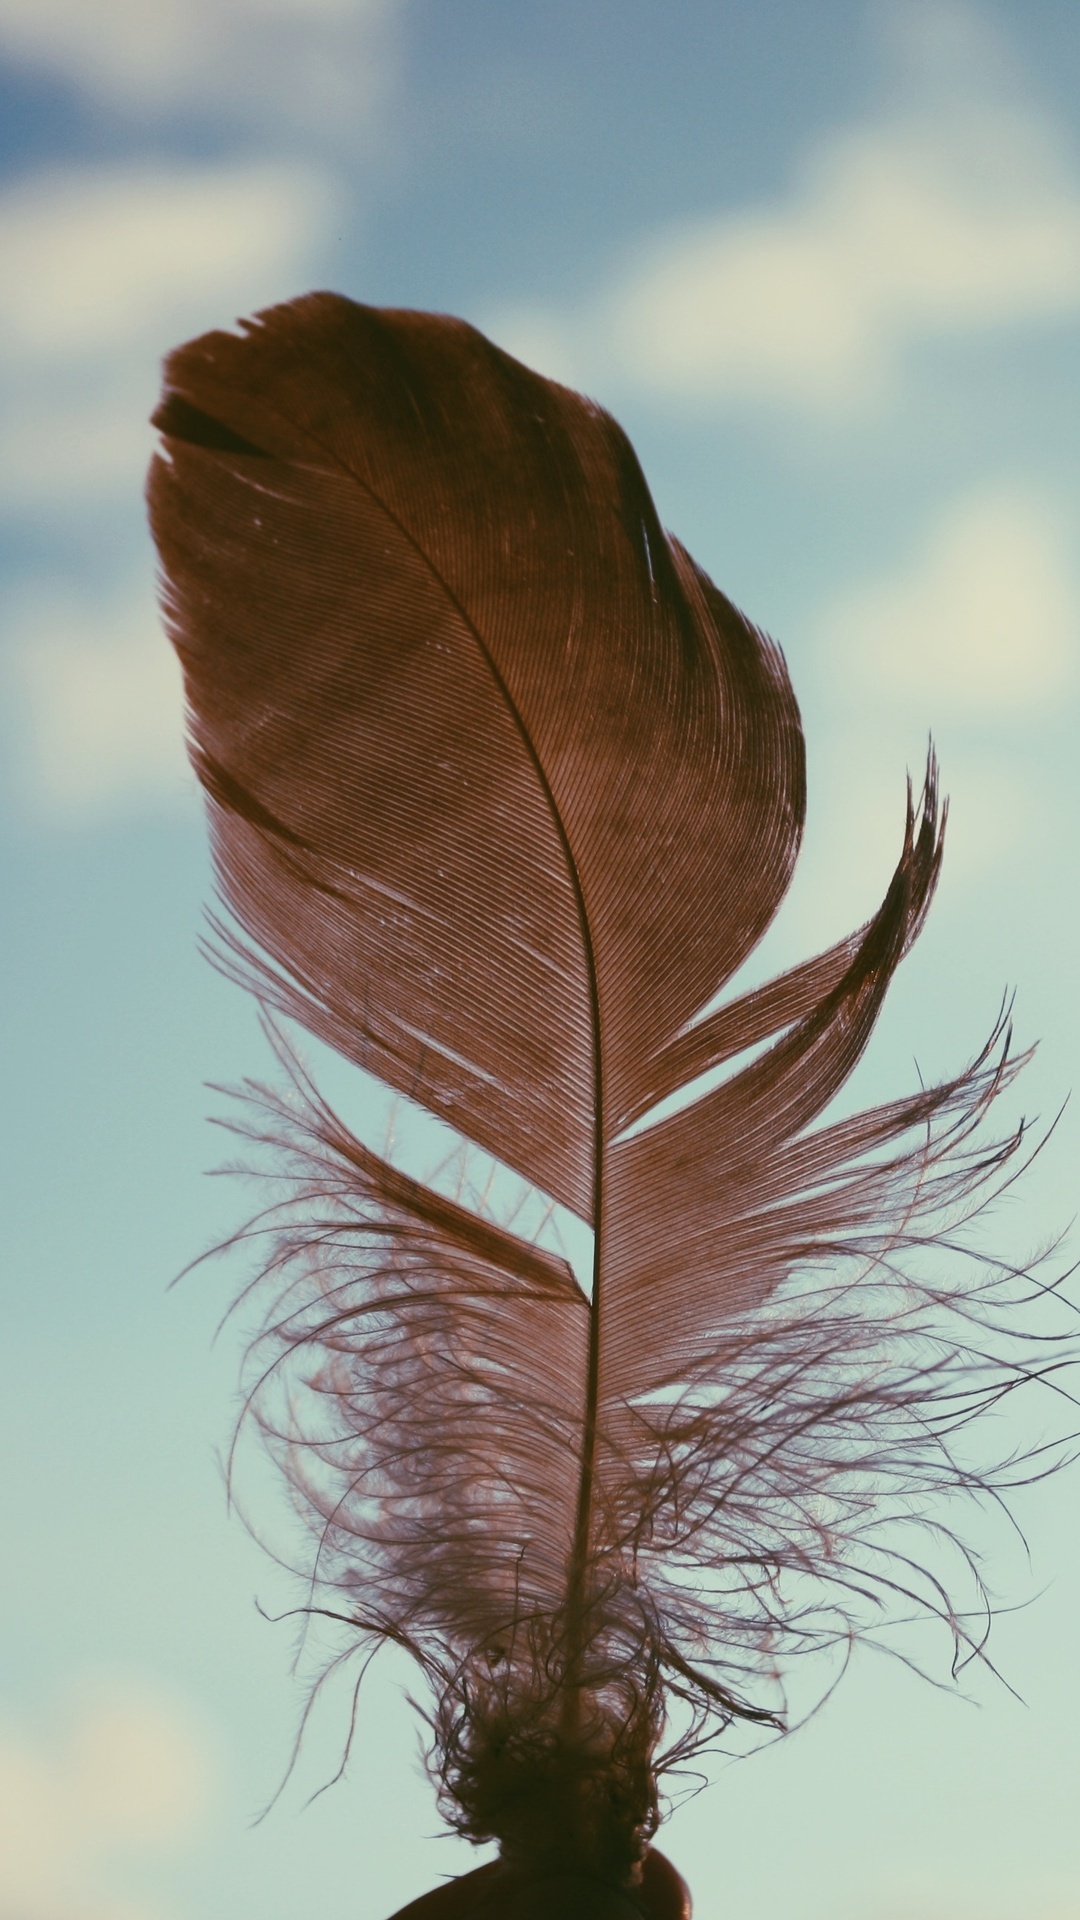 Feather: Contour feathers, forming the bird's outer body covering. 1080x1920 Full HD Background.